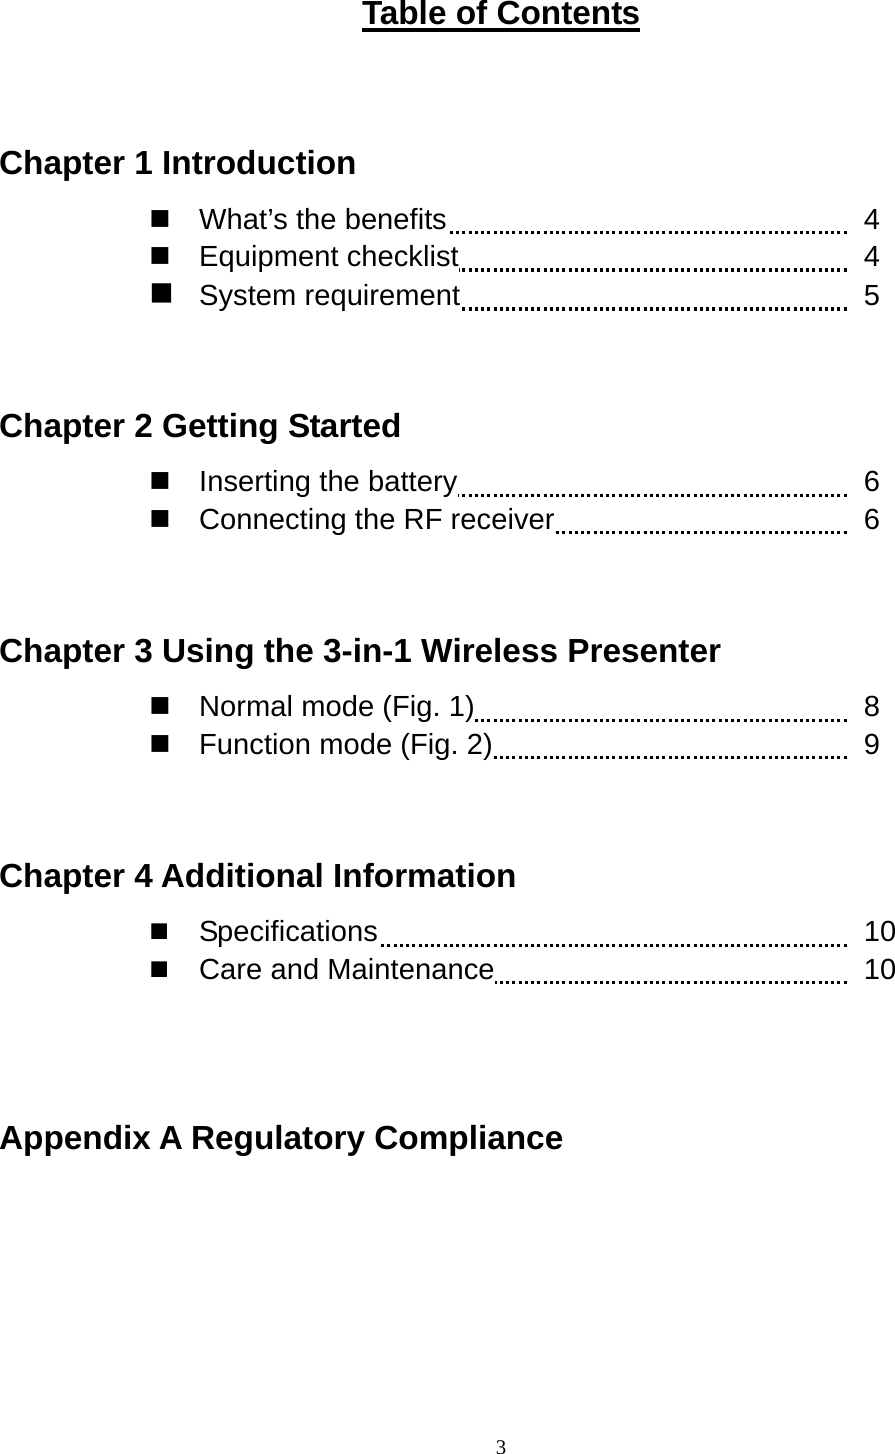    3Table of Contents  Chapter 1 Introduction  What’s the benefits          4  Equipment checklist         4  System requirement         5  Chapter 2 Getting Started  Inserting the battery         6  Connecting the RF receiver       6   Chapter 3 Using the 3-in-1 Wireless Presenter  Normal mode (Fig. 1)         8  Function mode (Fig. 2)         9  Chapter 4 Additional Information   Specifications           10   Care and Maintenance         10   Appendix A Regulatory Compliance    